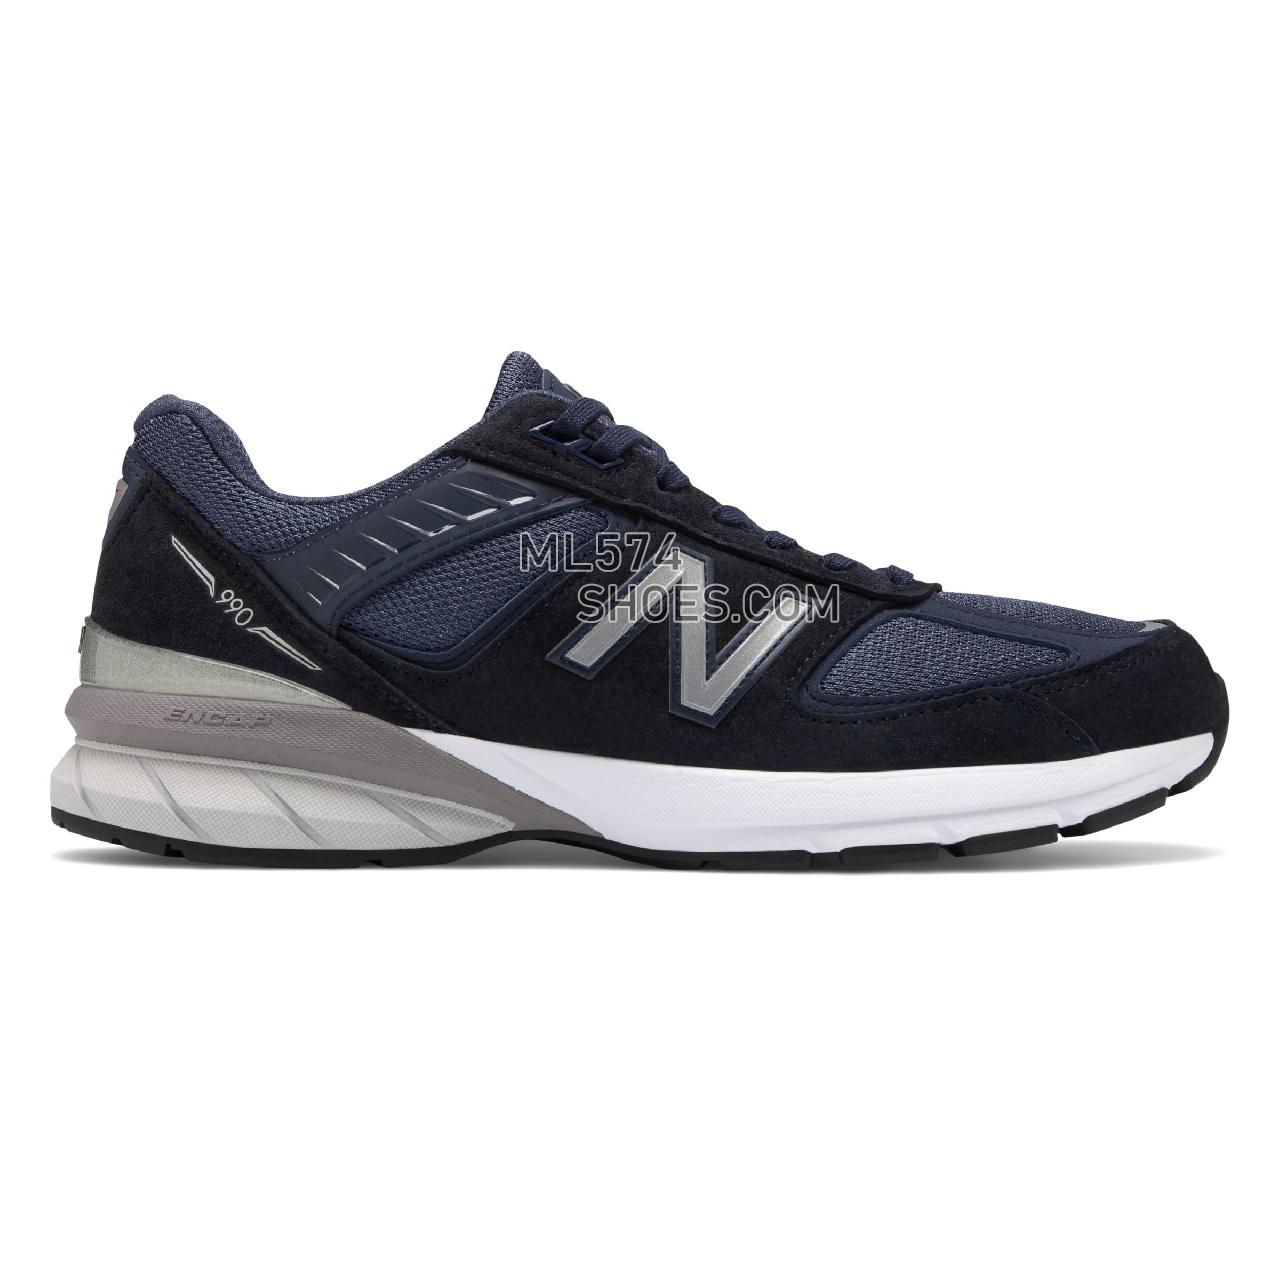 New Balance 990v5 Made in US - Men's Neutral Running - Navy with Silver - M990NV5